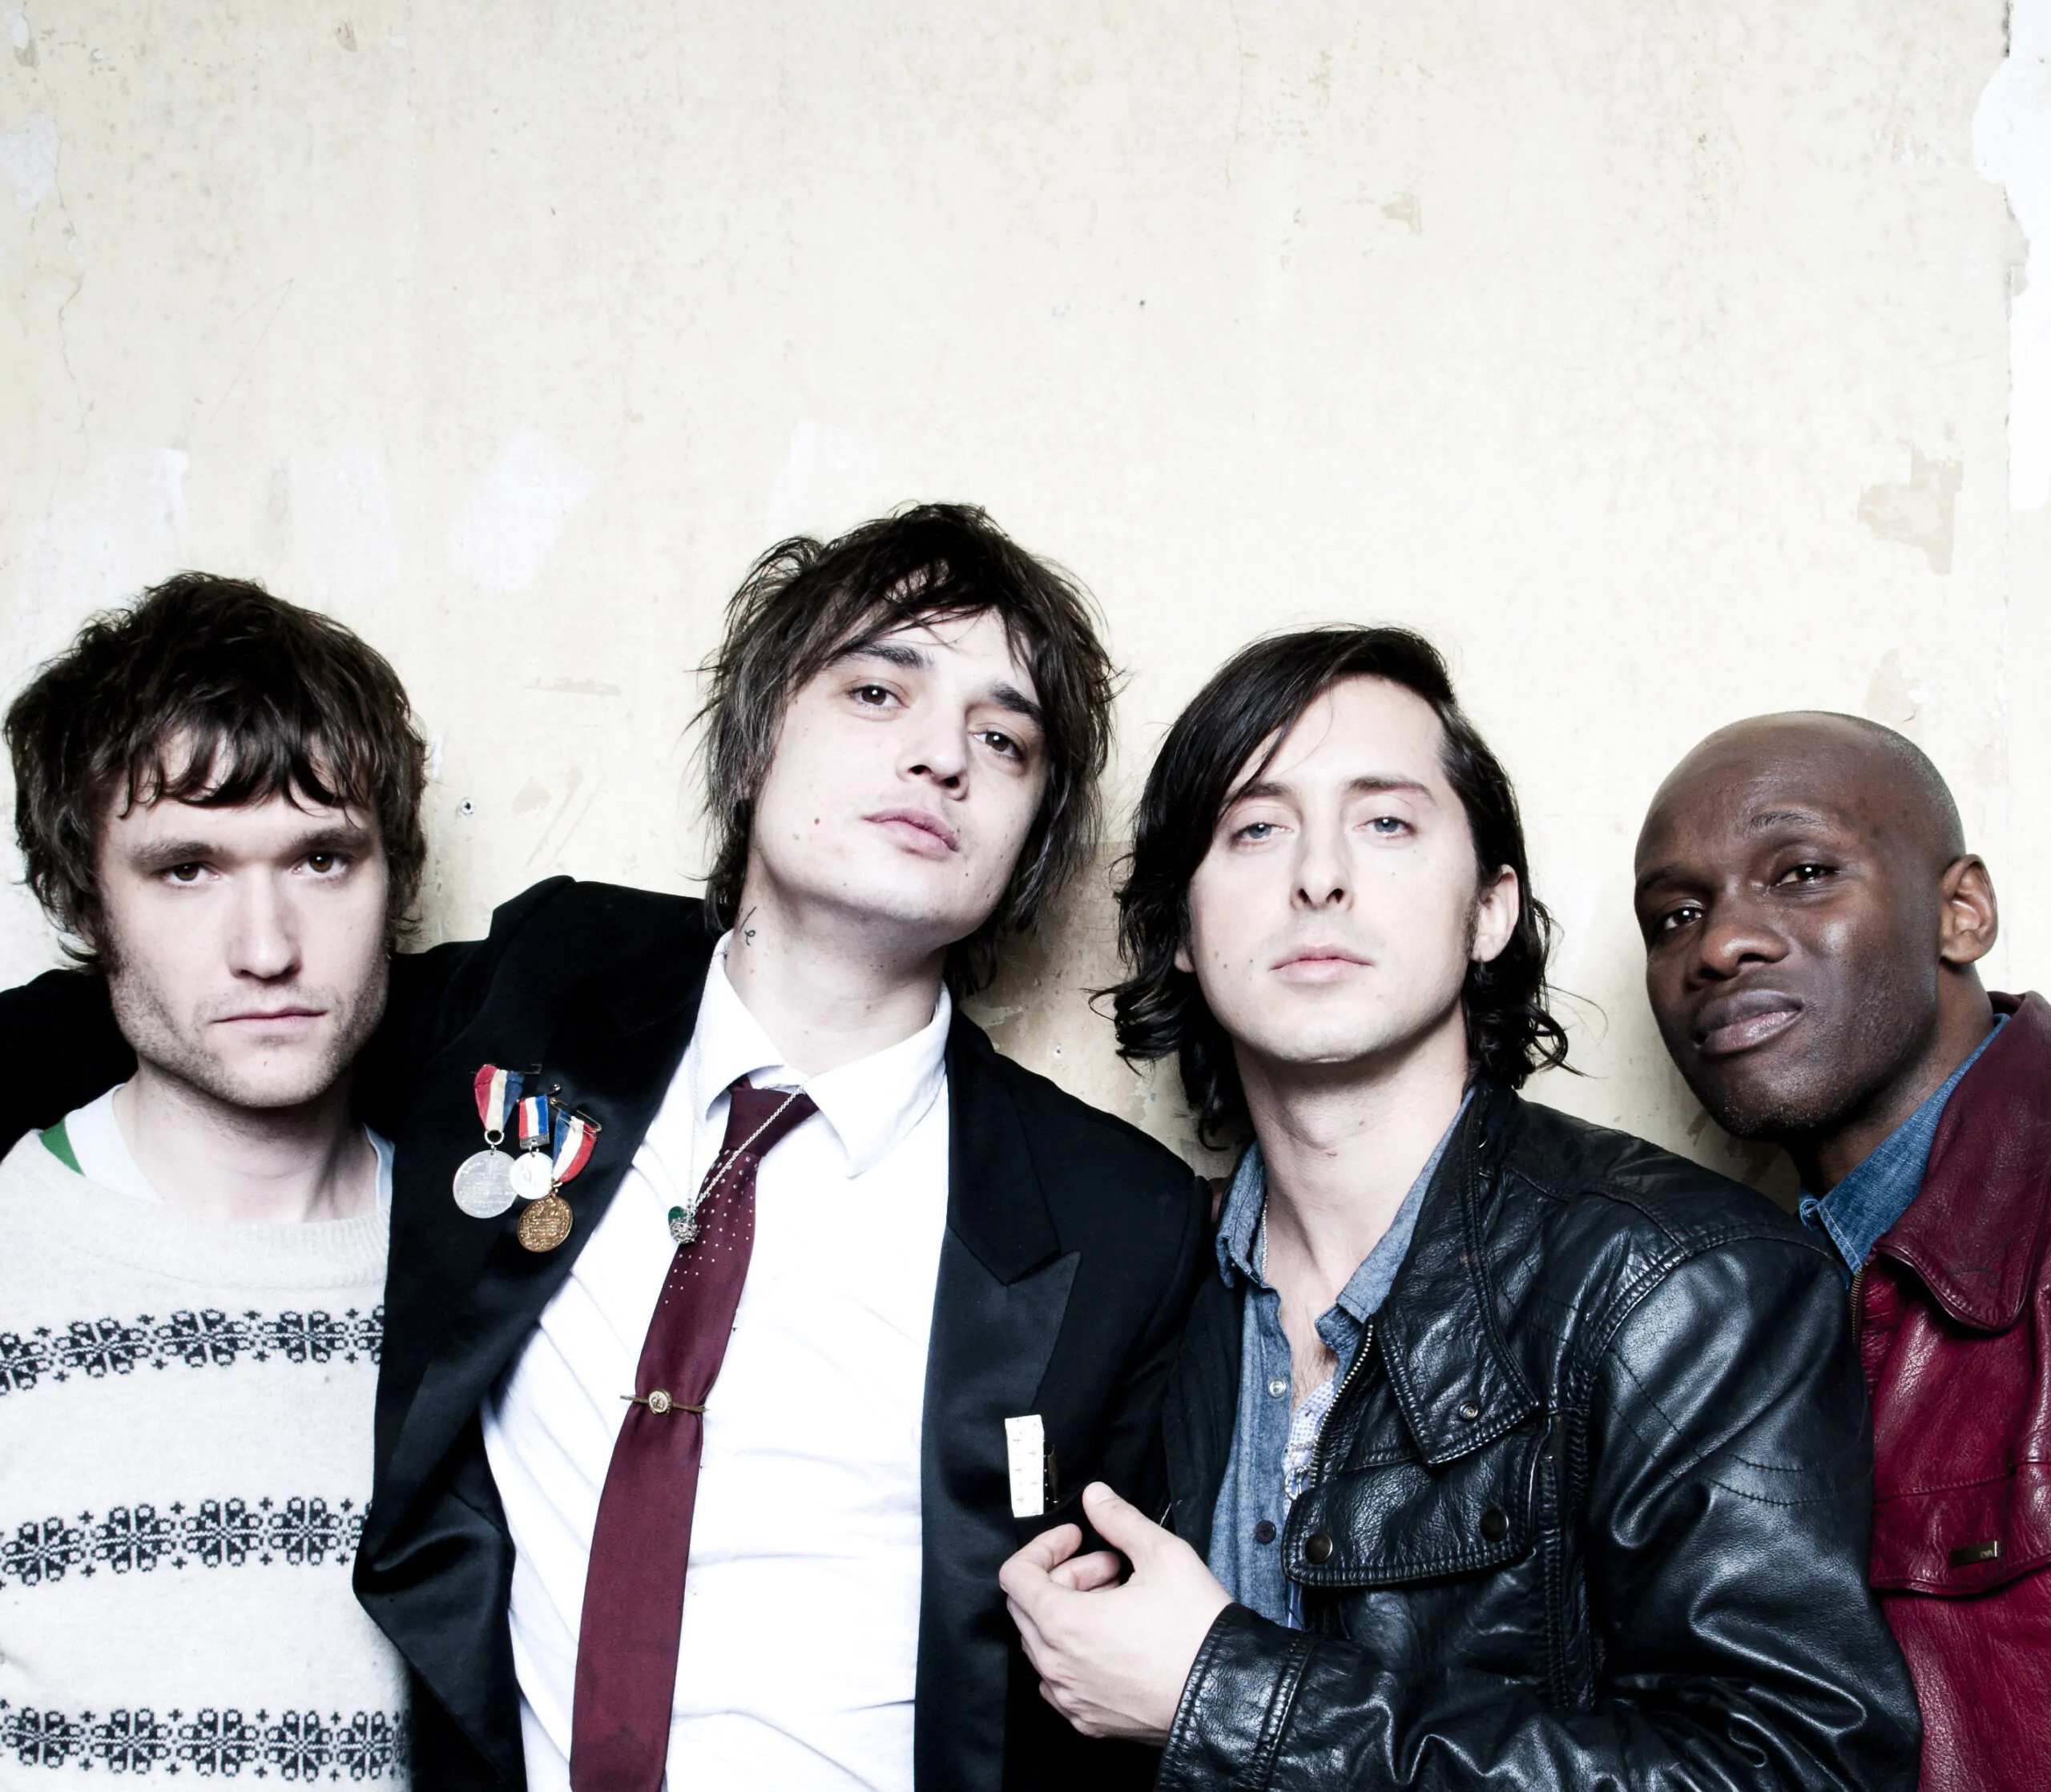 Snap Galleries collaborate with “the UK’s most important music photographer” Roger Sargent for new Libertines exhibition